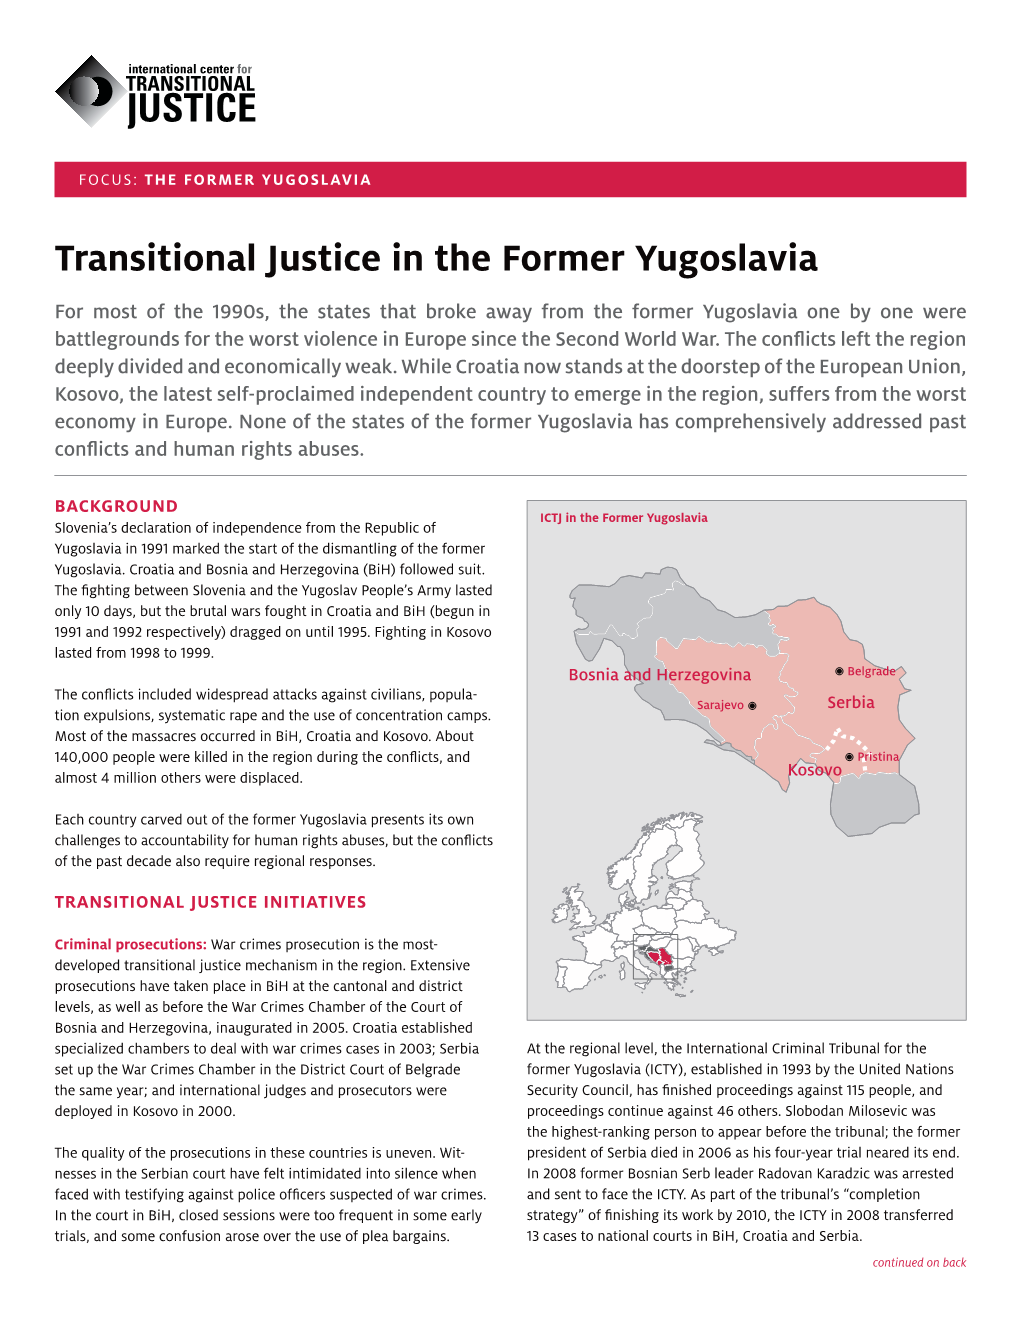 Transitional Justice in the Former Yugoslavia